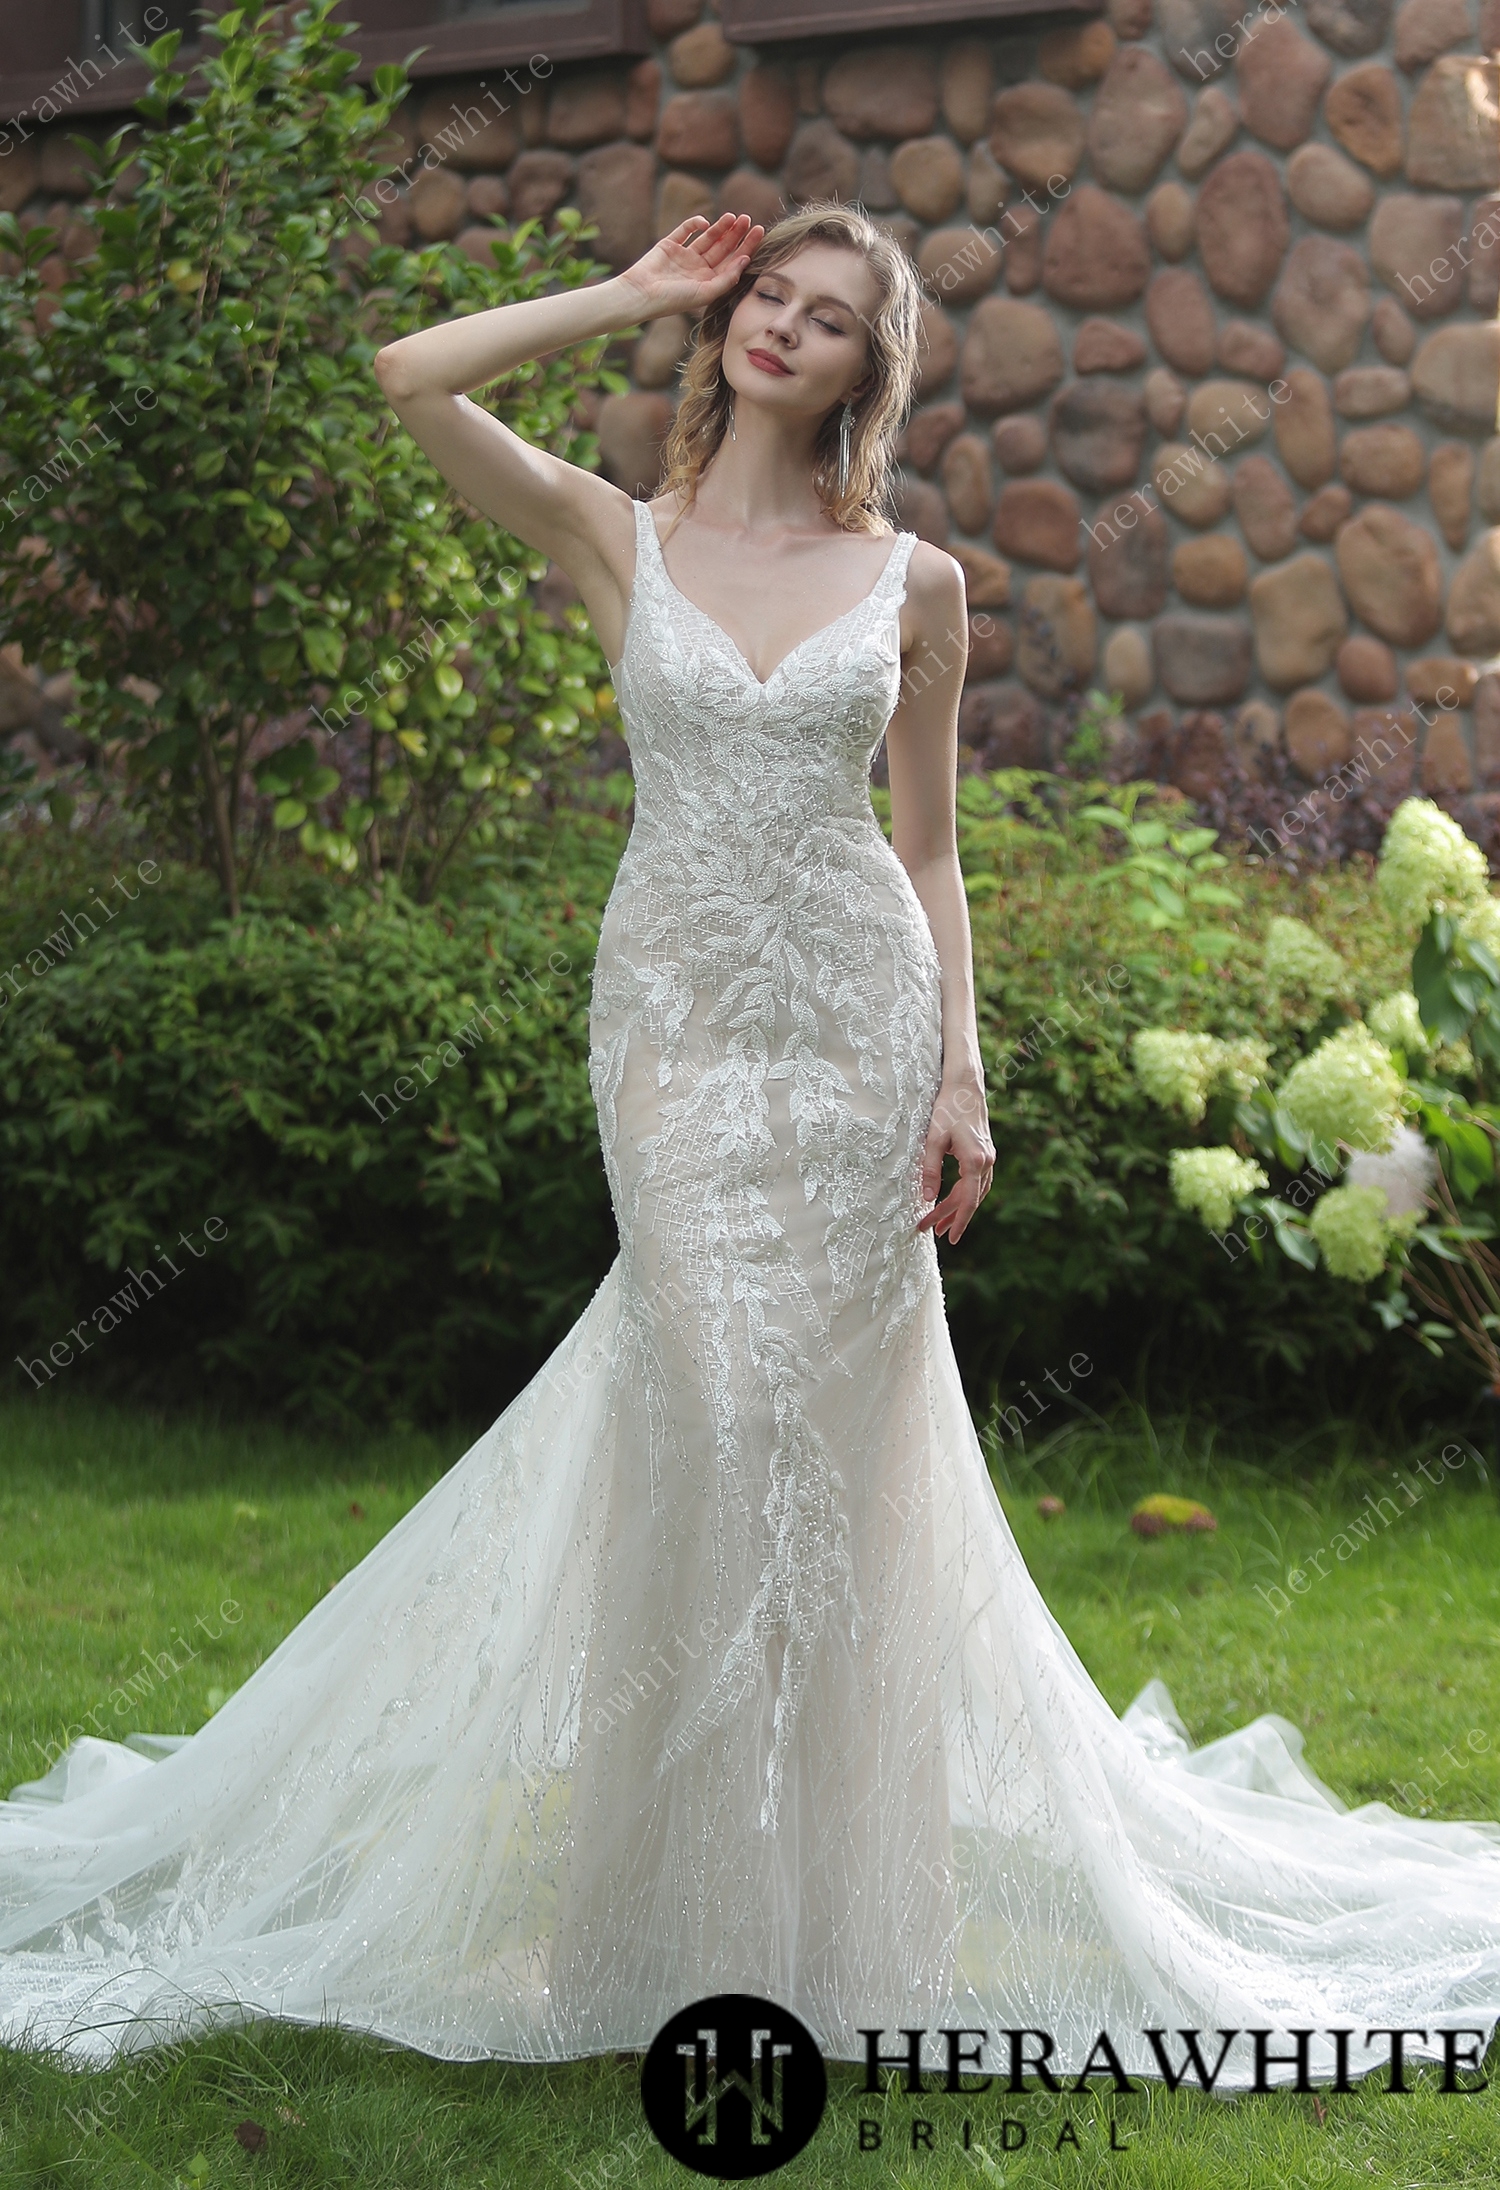 Stunning Mermaid Wedding Dress With Embroidered Appliqués